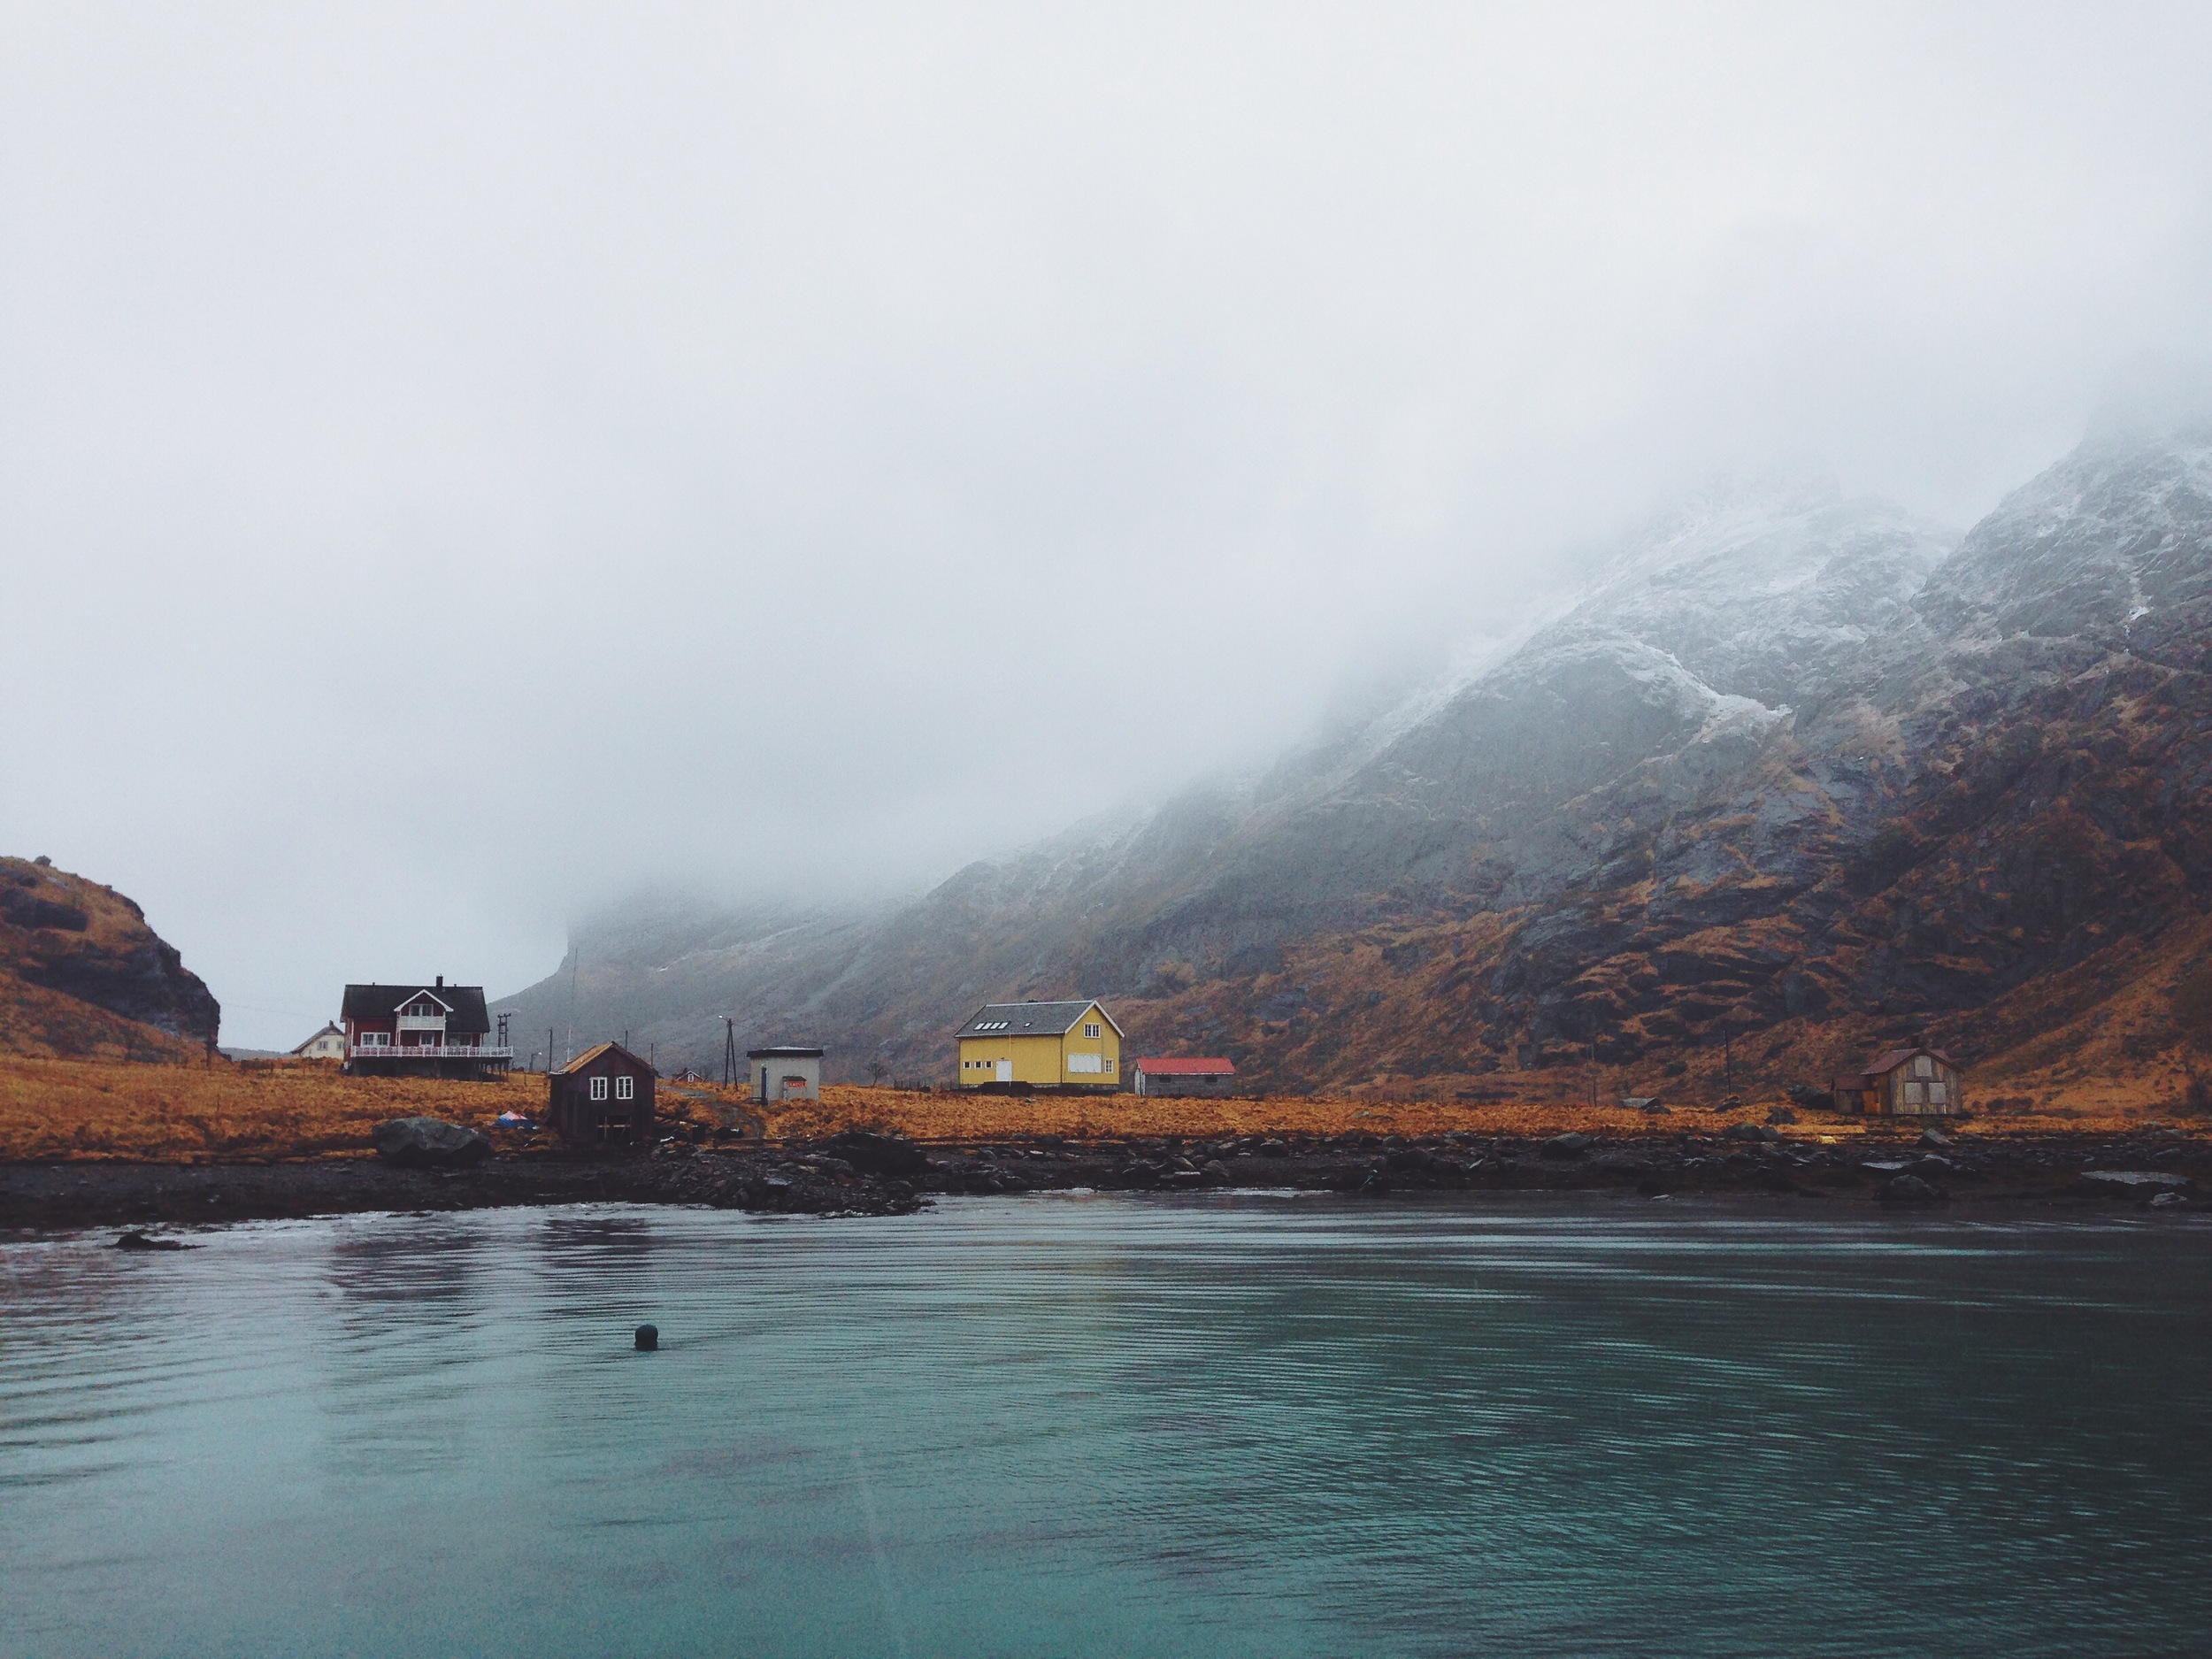   "Little House on the Fjord"&nbsp;   Lofoten Islands, Norway || March 2014 || iPhone 5 